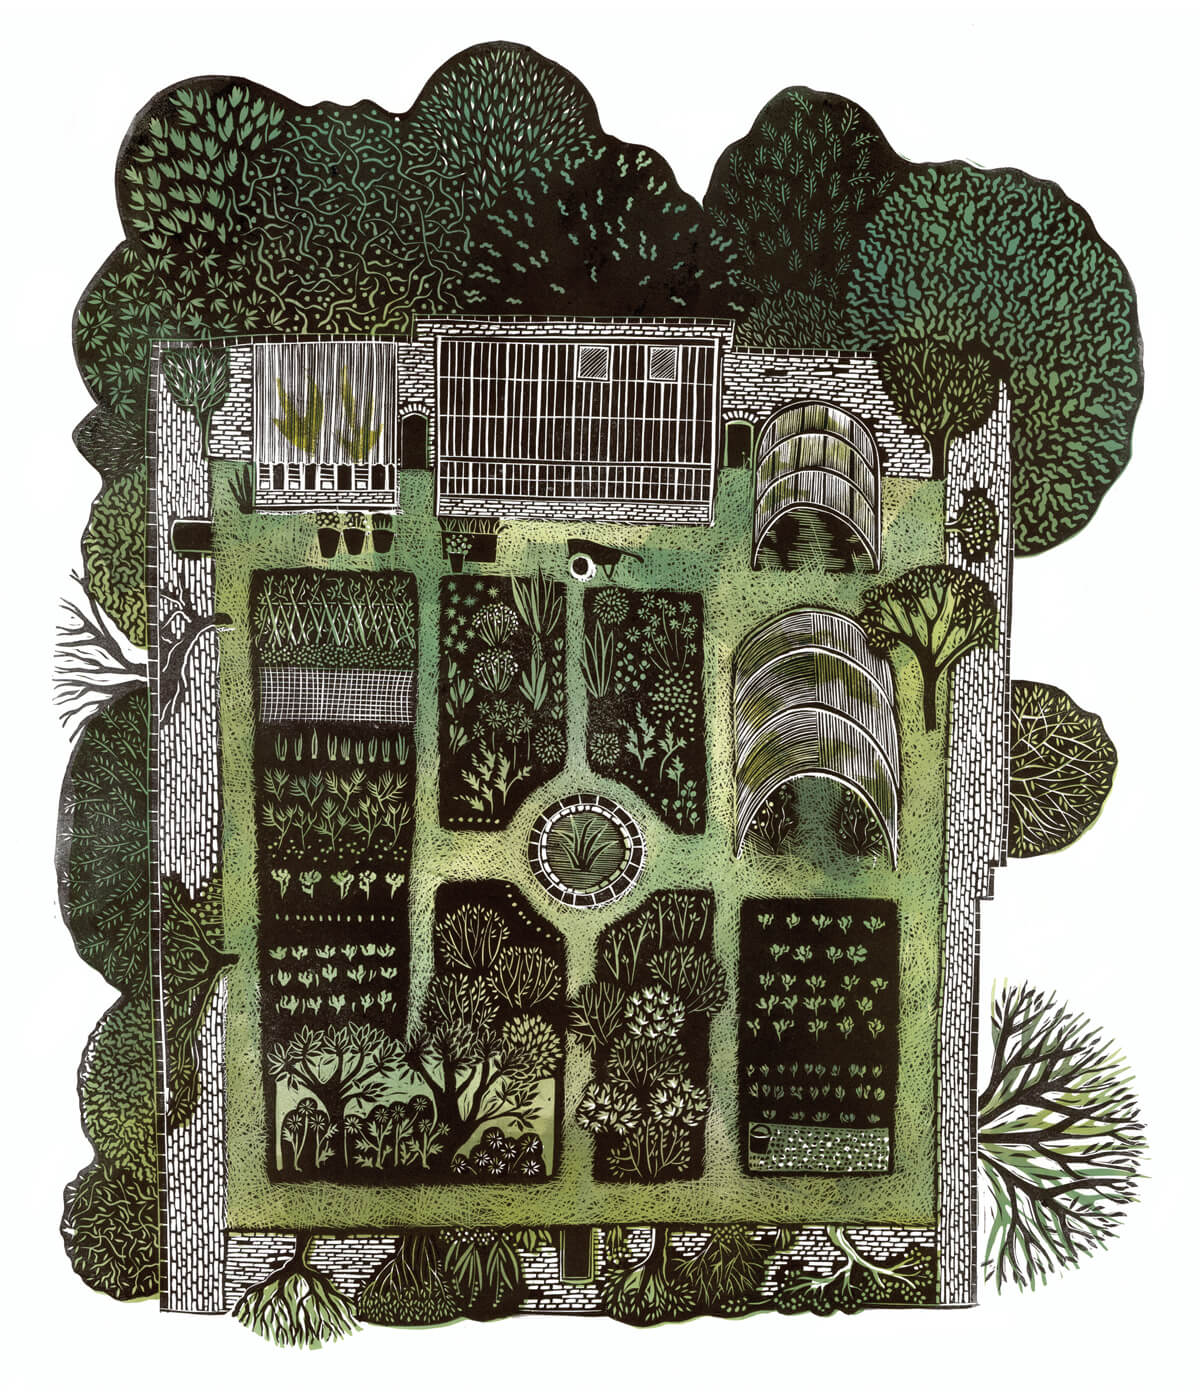 Kitchen Gardens, Launde, a linocut print by Sarah Kirby